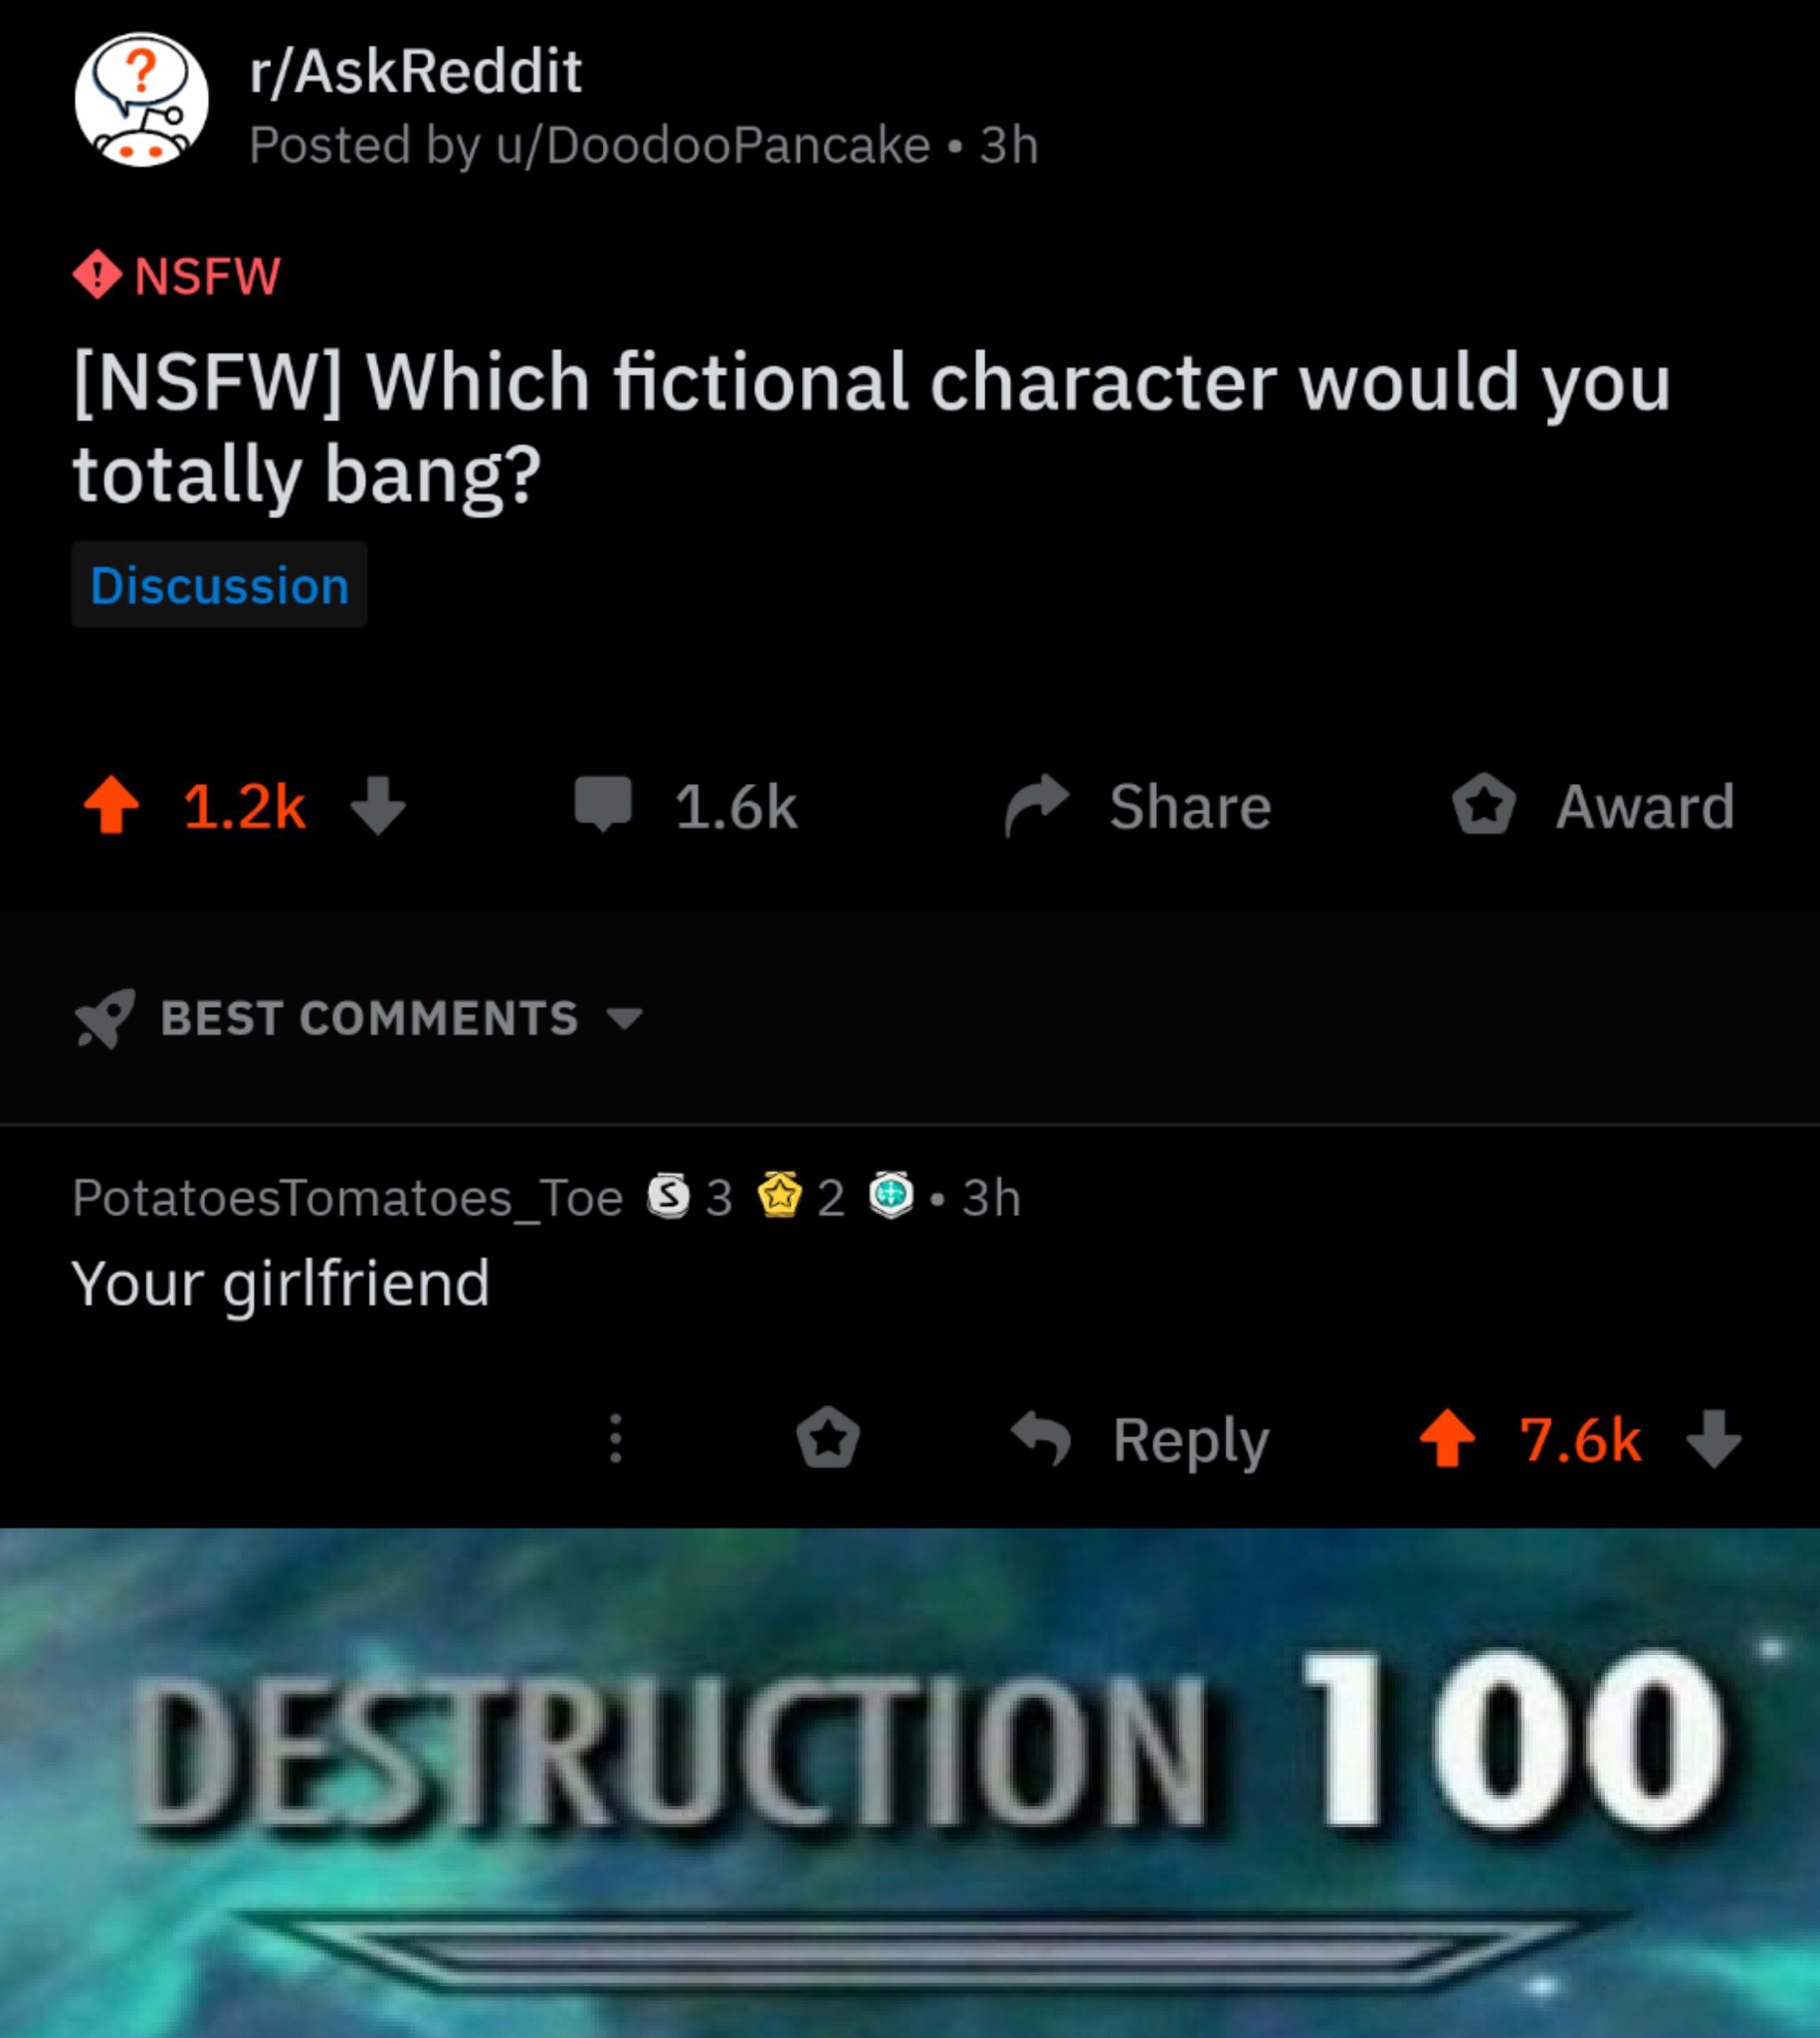 funny memes - fictional character would you totally bang - rAskReddit Posted by uDoodooPancake 3h Nsfw Nsfw Which fictional character would you totally bang? Discussion 4 _ |_ Award Best 2 .3h PotatoesTomatoes_Toe $ 3 Your girlfriend Destruction 100